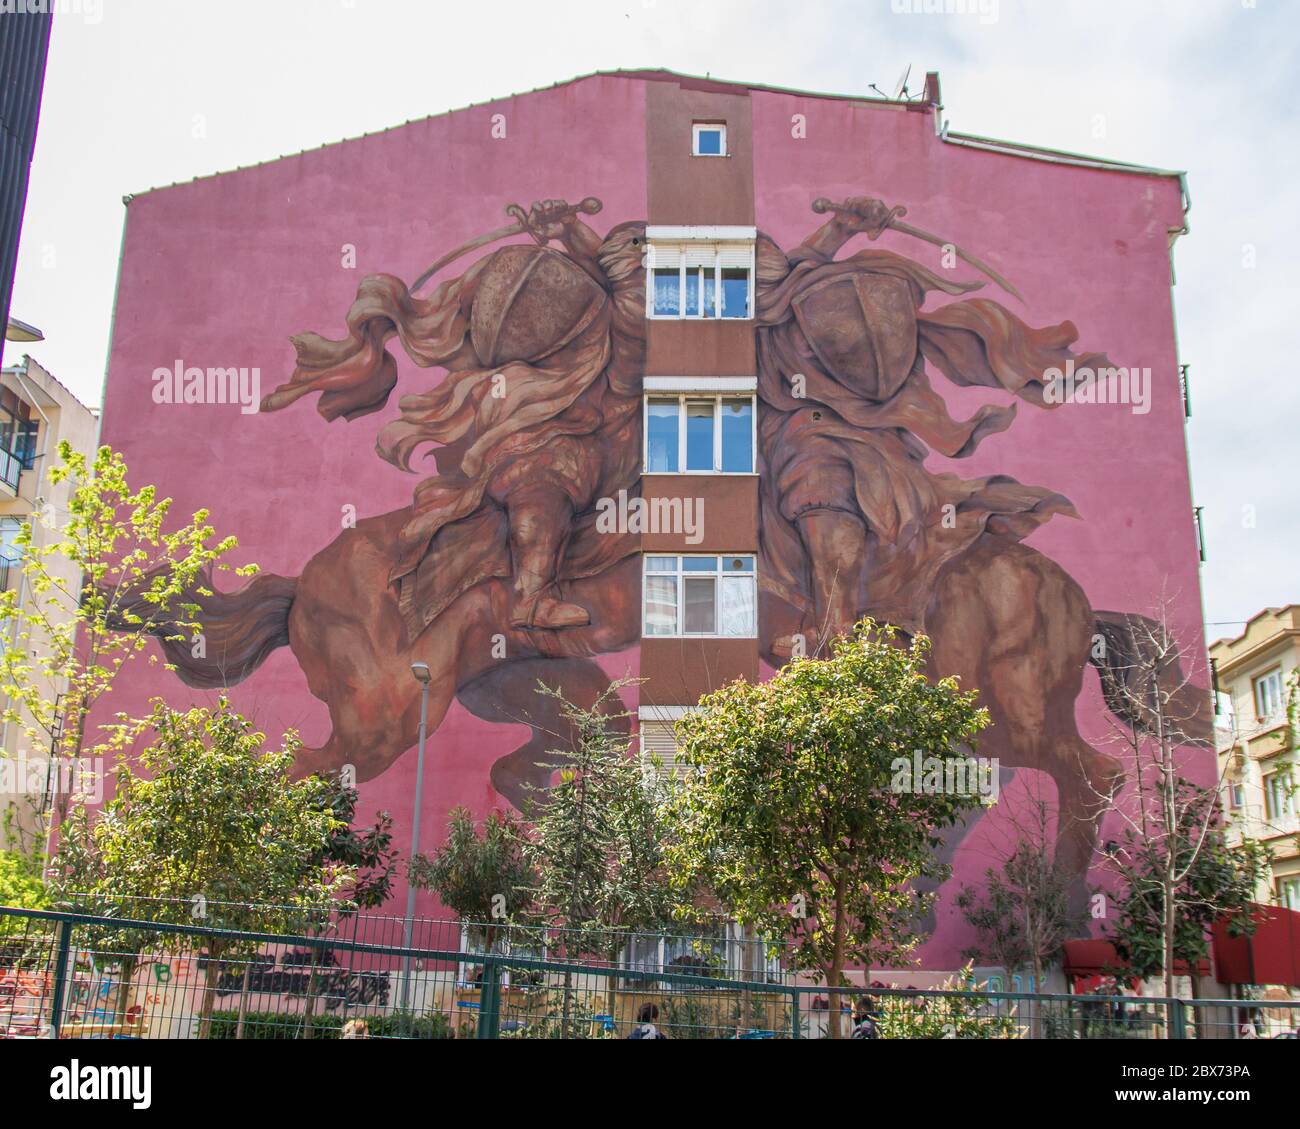 Istanbul Displays A Huge Amount Of Beautiful Painting And Murales Expecially Around The Kadikoy District On The Asian Side Stock Photo Alamy